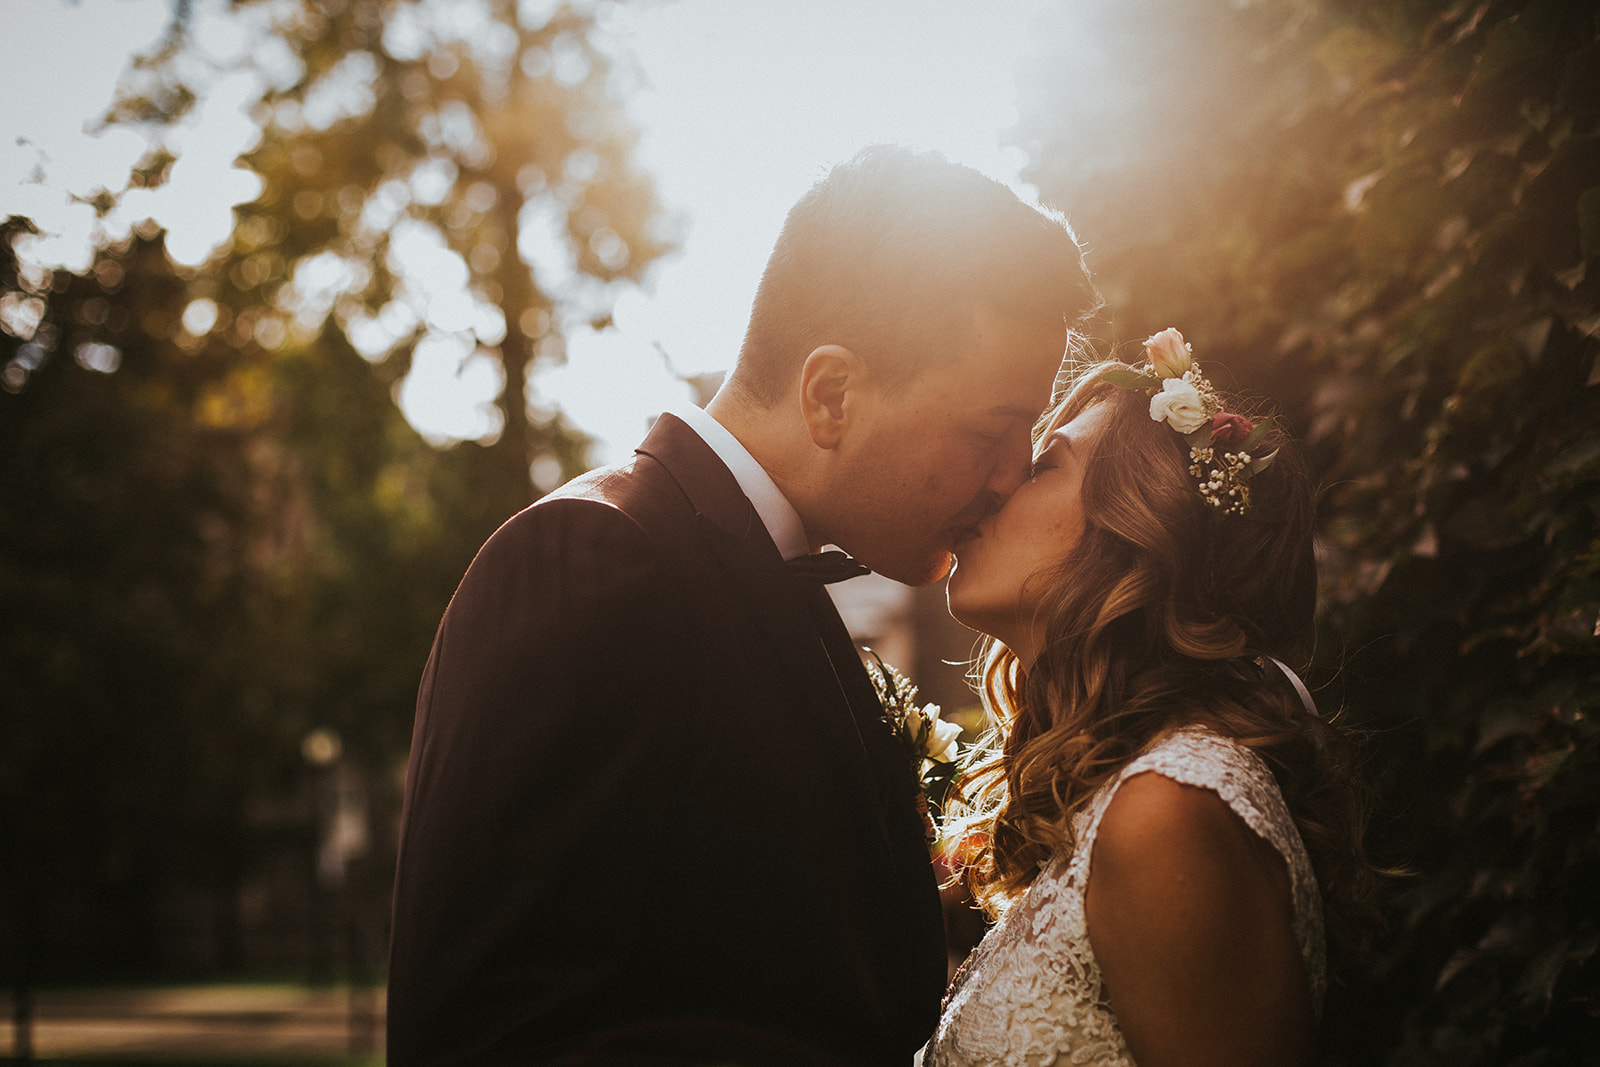 how to hire a wedding photographer, a guide to choosing a wedding photographer